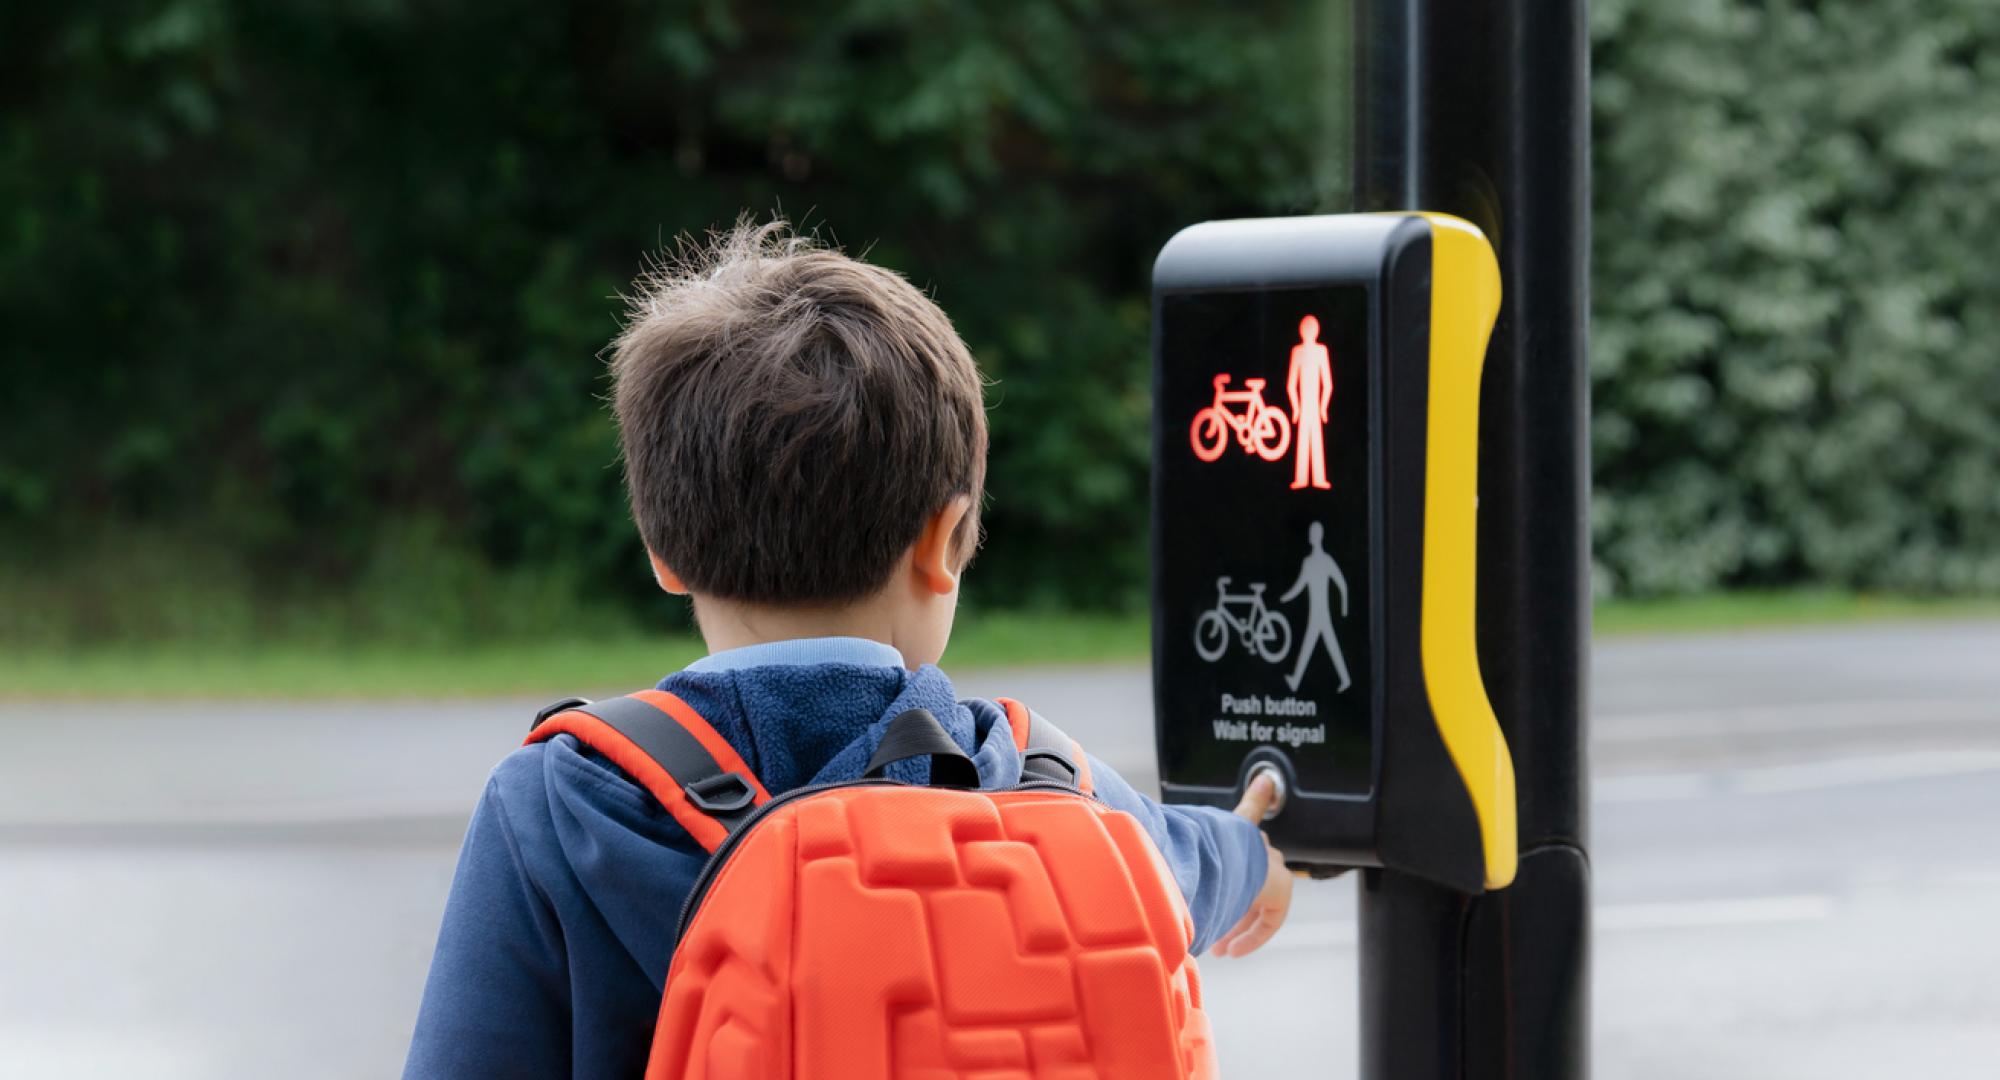 School kid pressing a button at traffic lights on pedestrian crossing on way to school